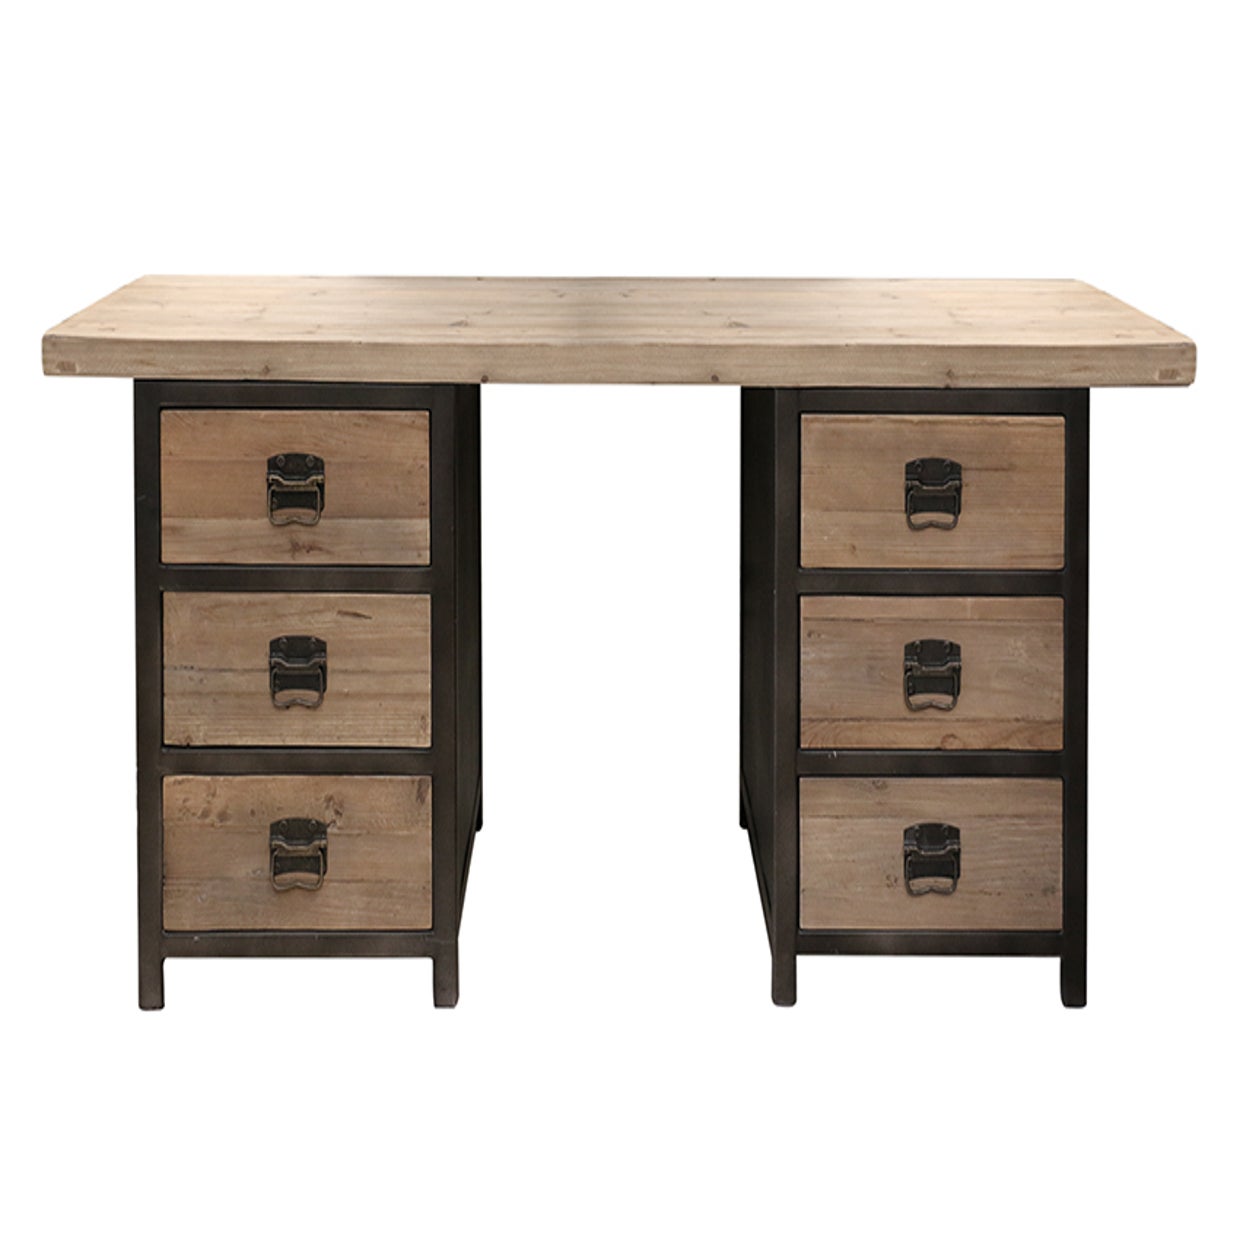 DEVON DESK WITH 6 DRAWERS IN NATURAL RECYCLED PINE WITH STEEL